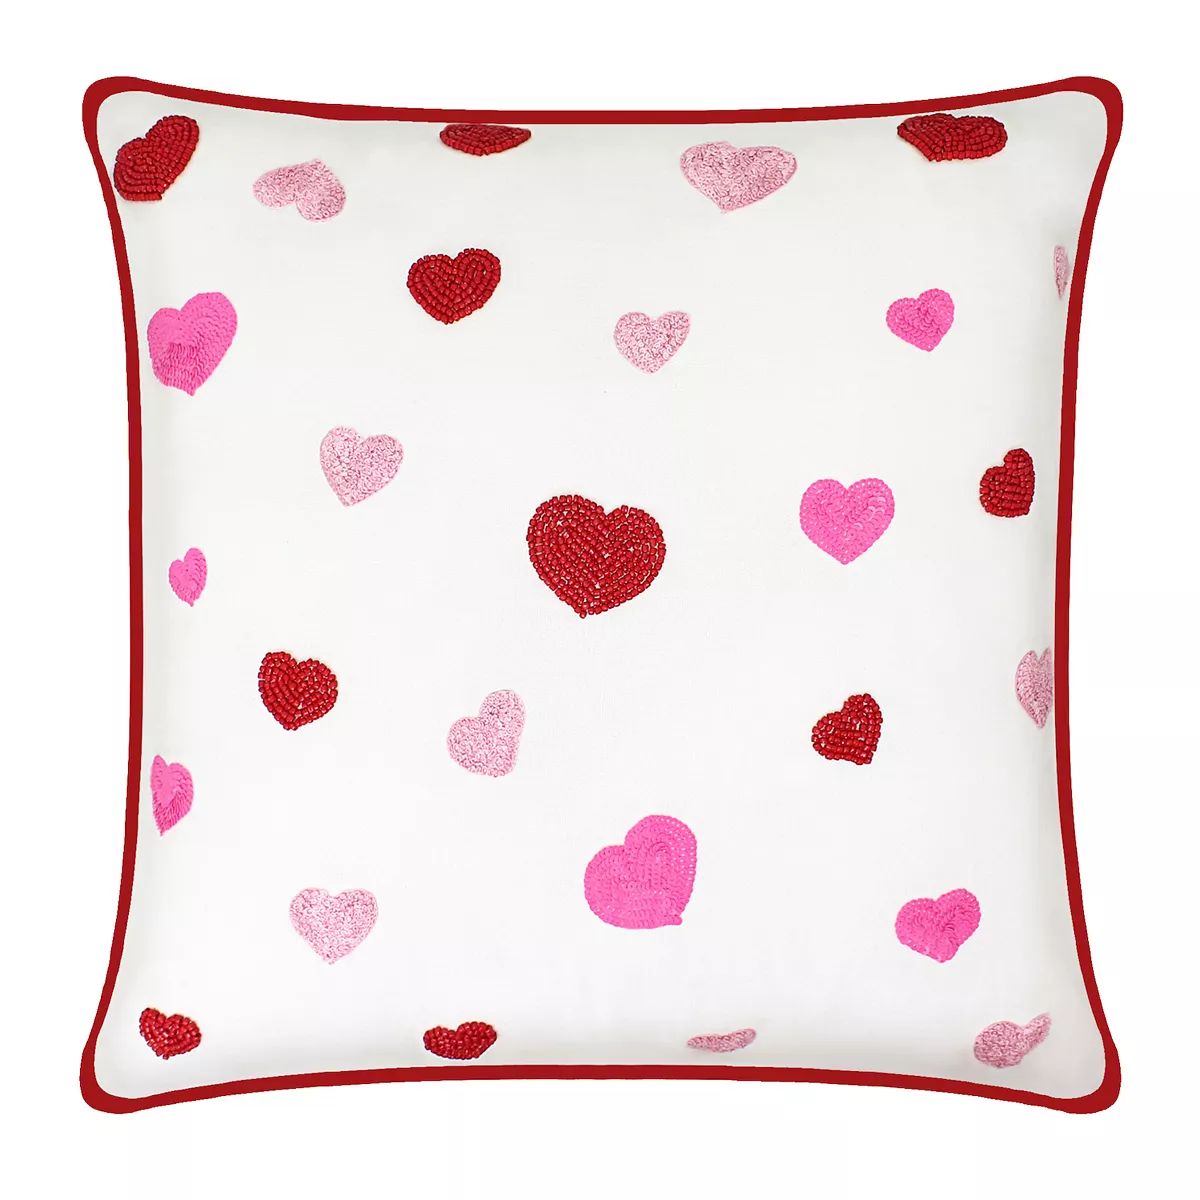 Celebrate Together™ Valentine's Day Heart Confetti Throw Pillow | Kohl's